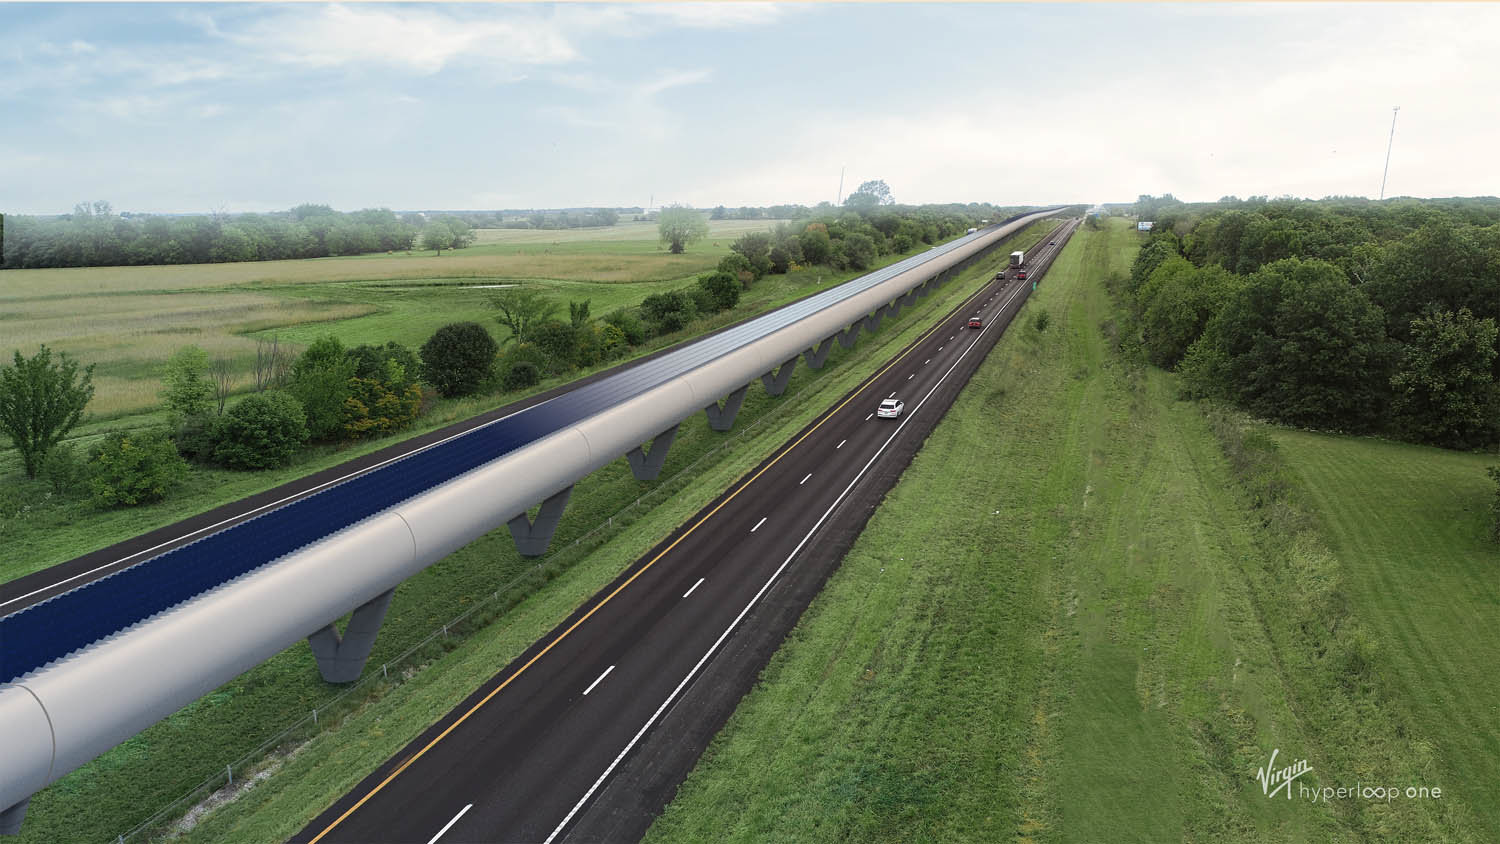 The proposed Missouri Hyperloop route would connect Kansas City, Columbia and St. Louis along the Interstate 70 corridor.